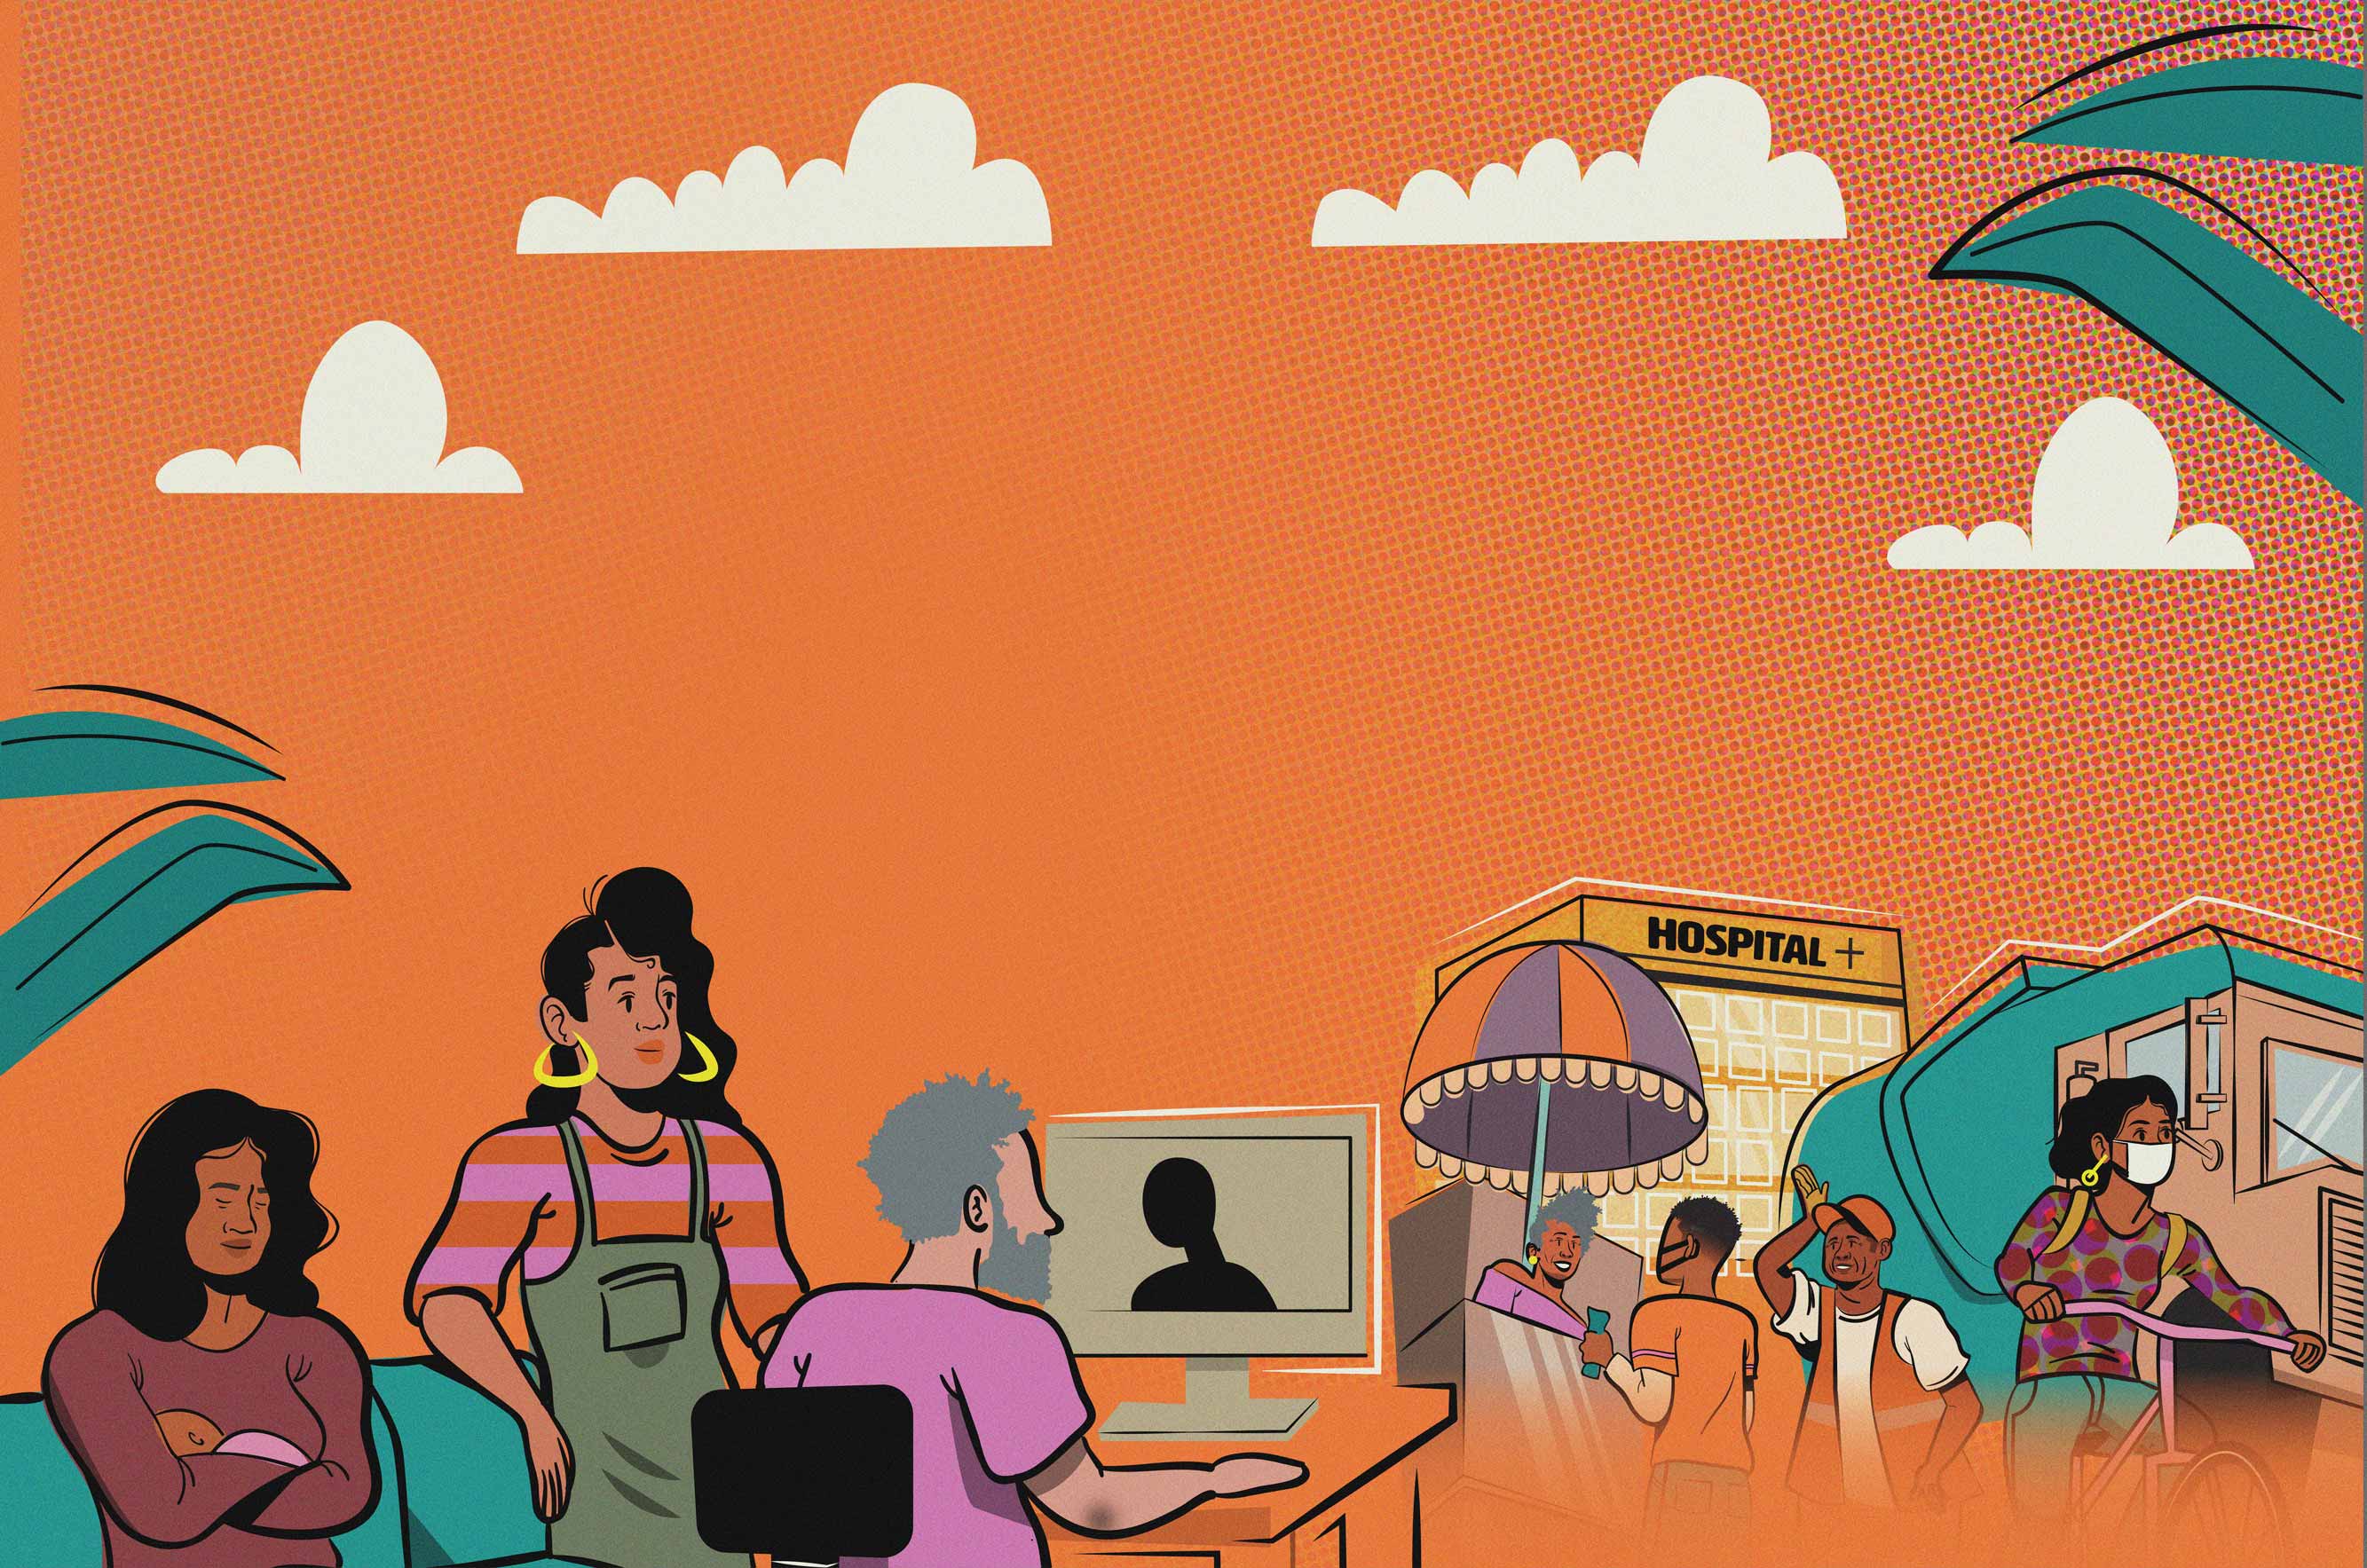 An illustration showing scenes of workers video conferencing, caretaking for a baby, selling food on the street, and making deliveries by bike against a vibrant orange background. In the background is a hospital and garbage truck.